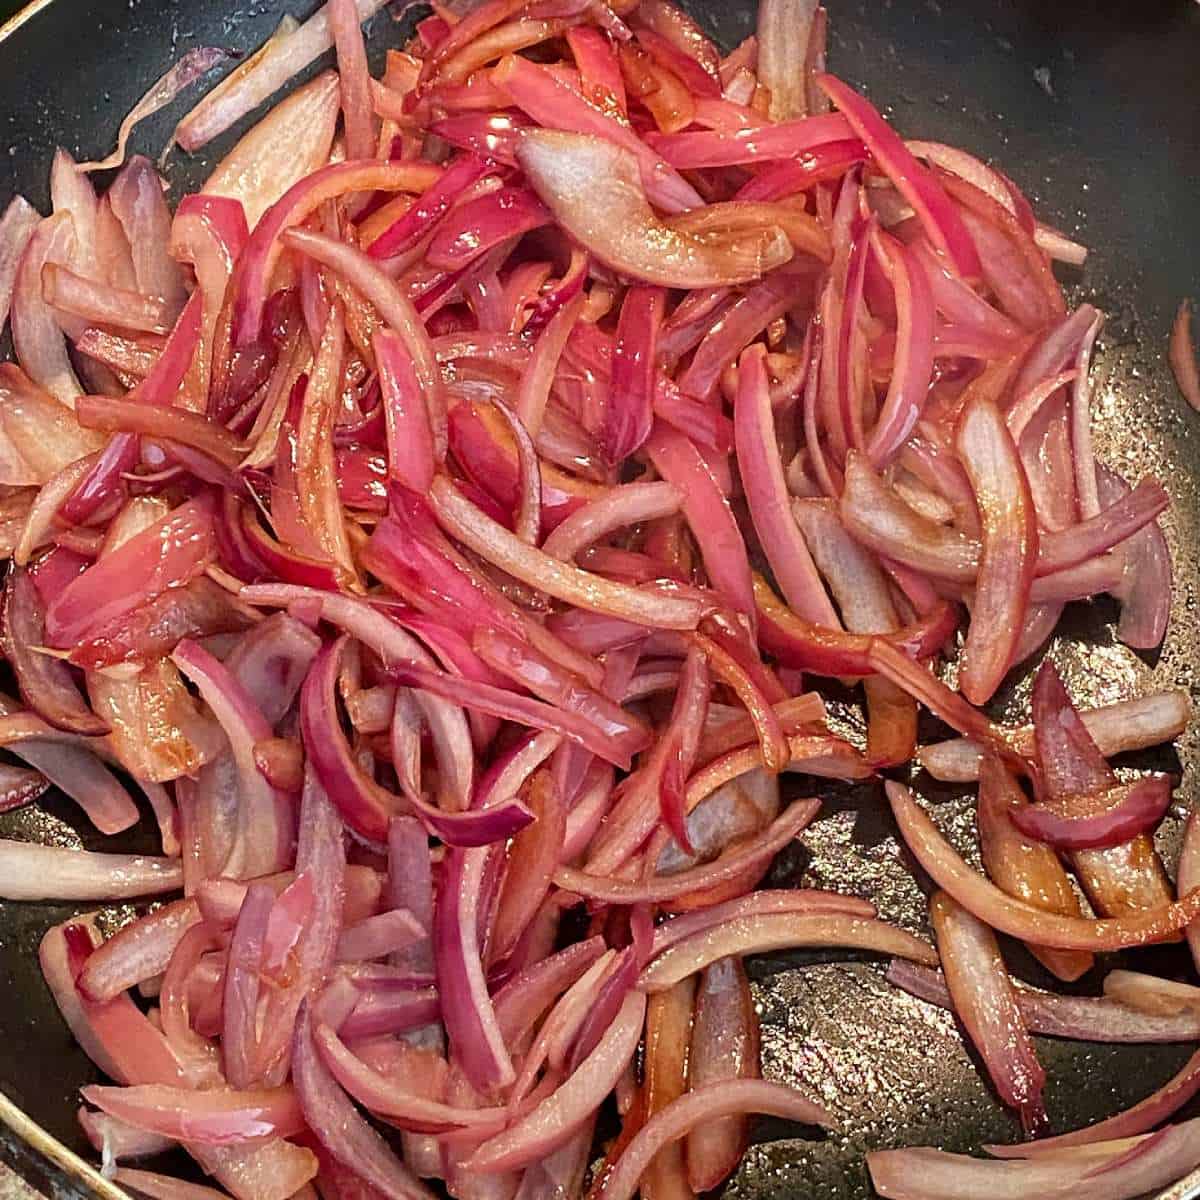 Red onion caramelizing in a fry pan